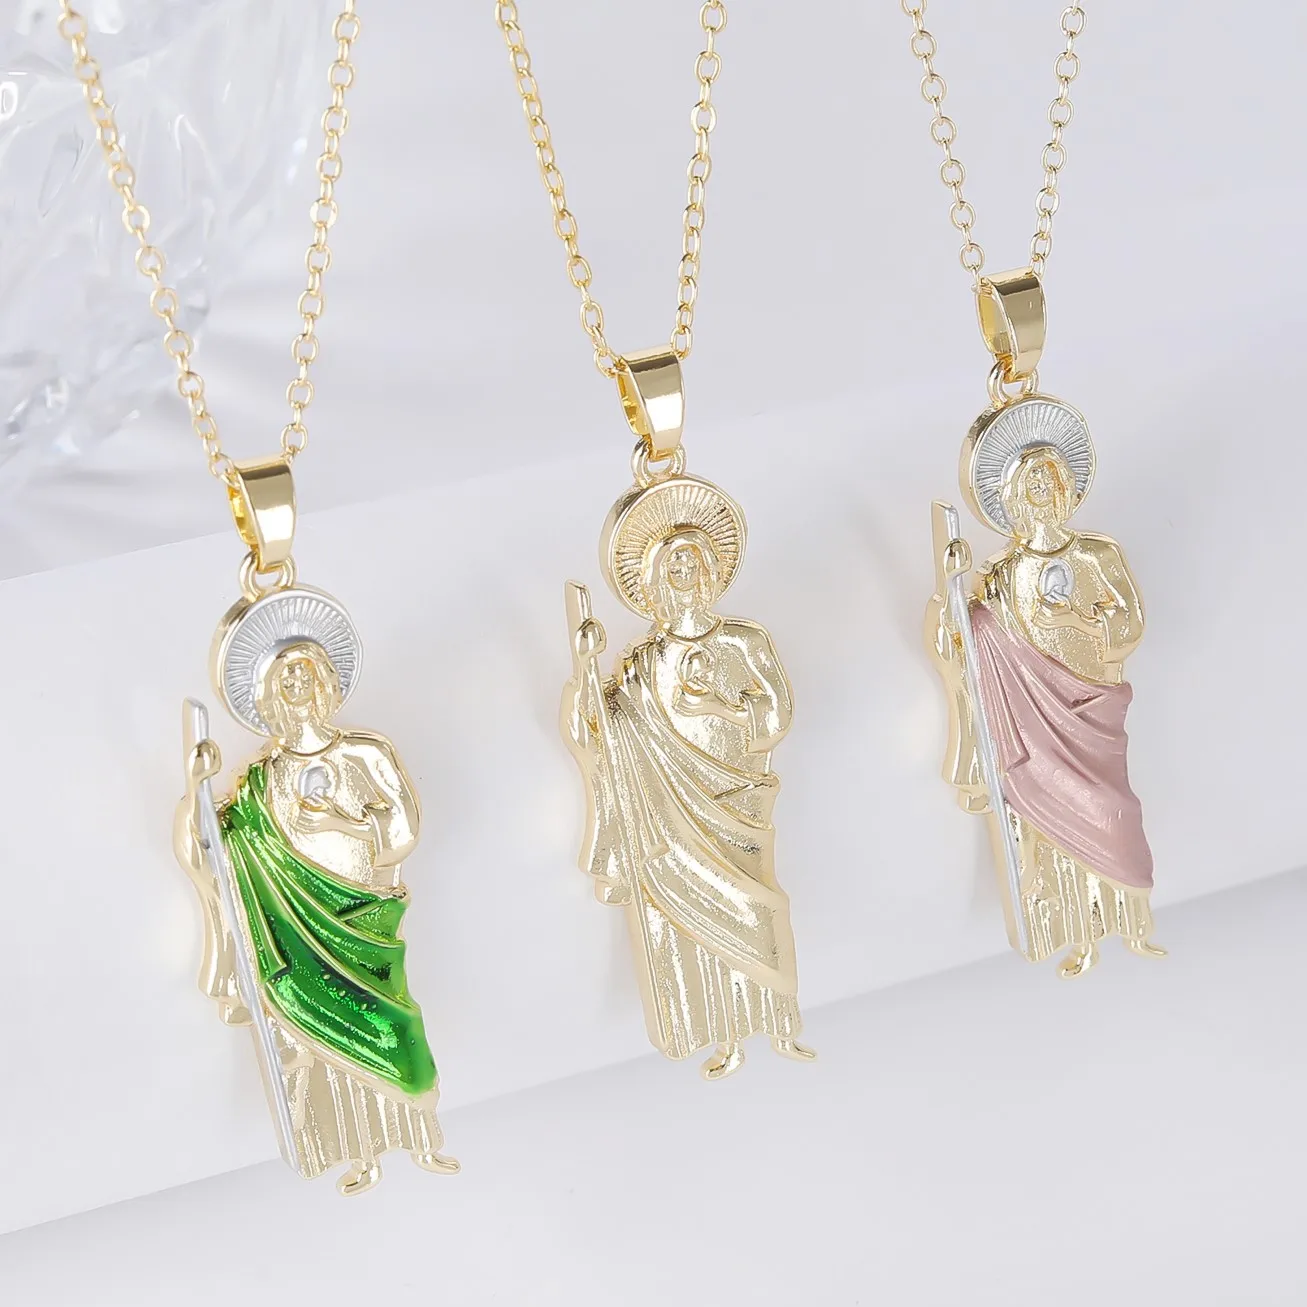 Green Pink Gold Color San Judas Tadeo Pendant Necklace 3 Sizes Gold Necklace for Men Women Gifts Religious Jewelry